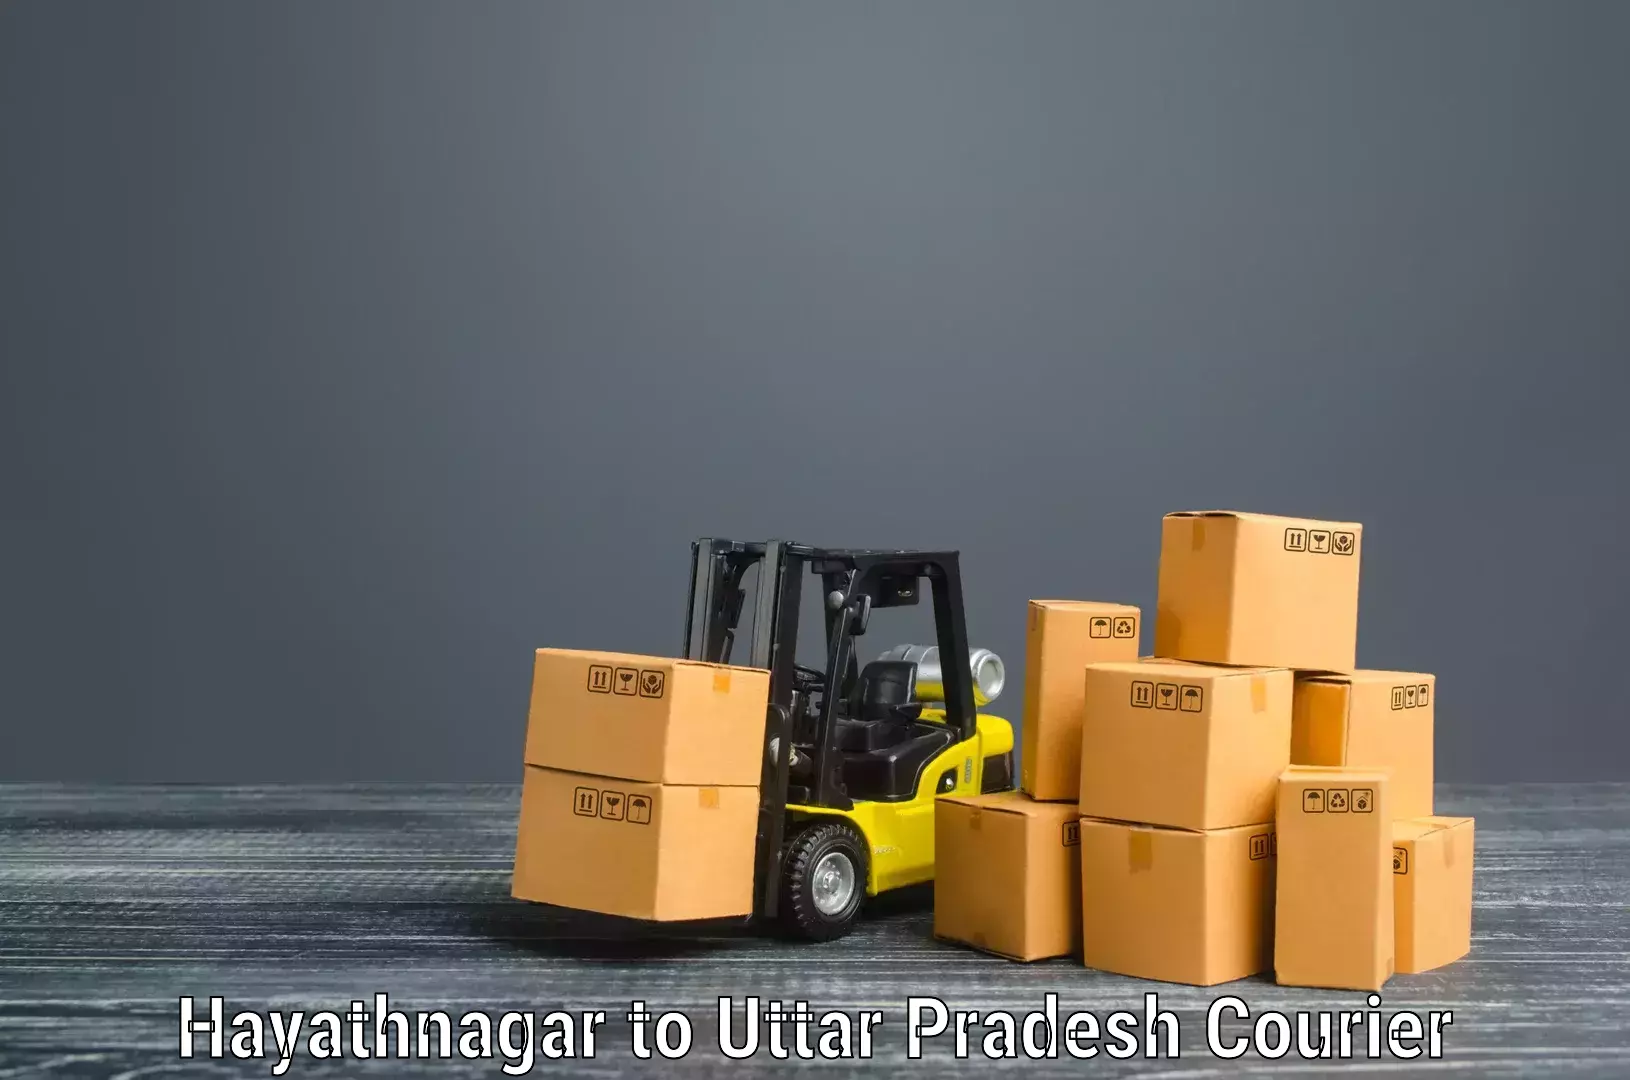 Professional movers and packers Hayathnagar to Kanpur